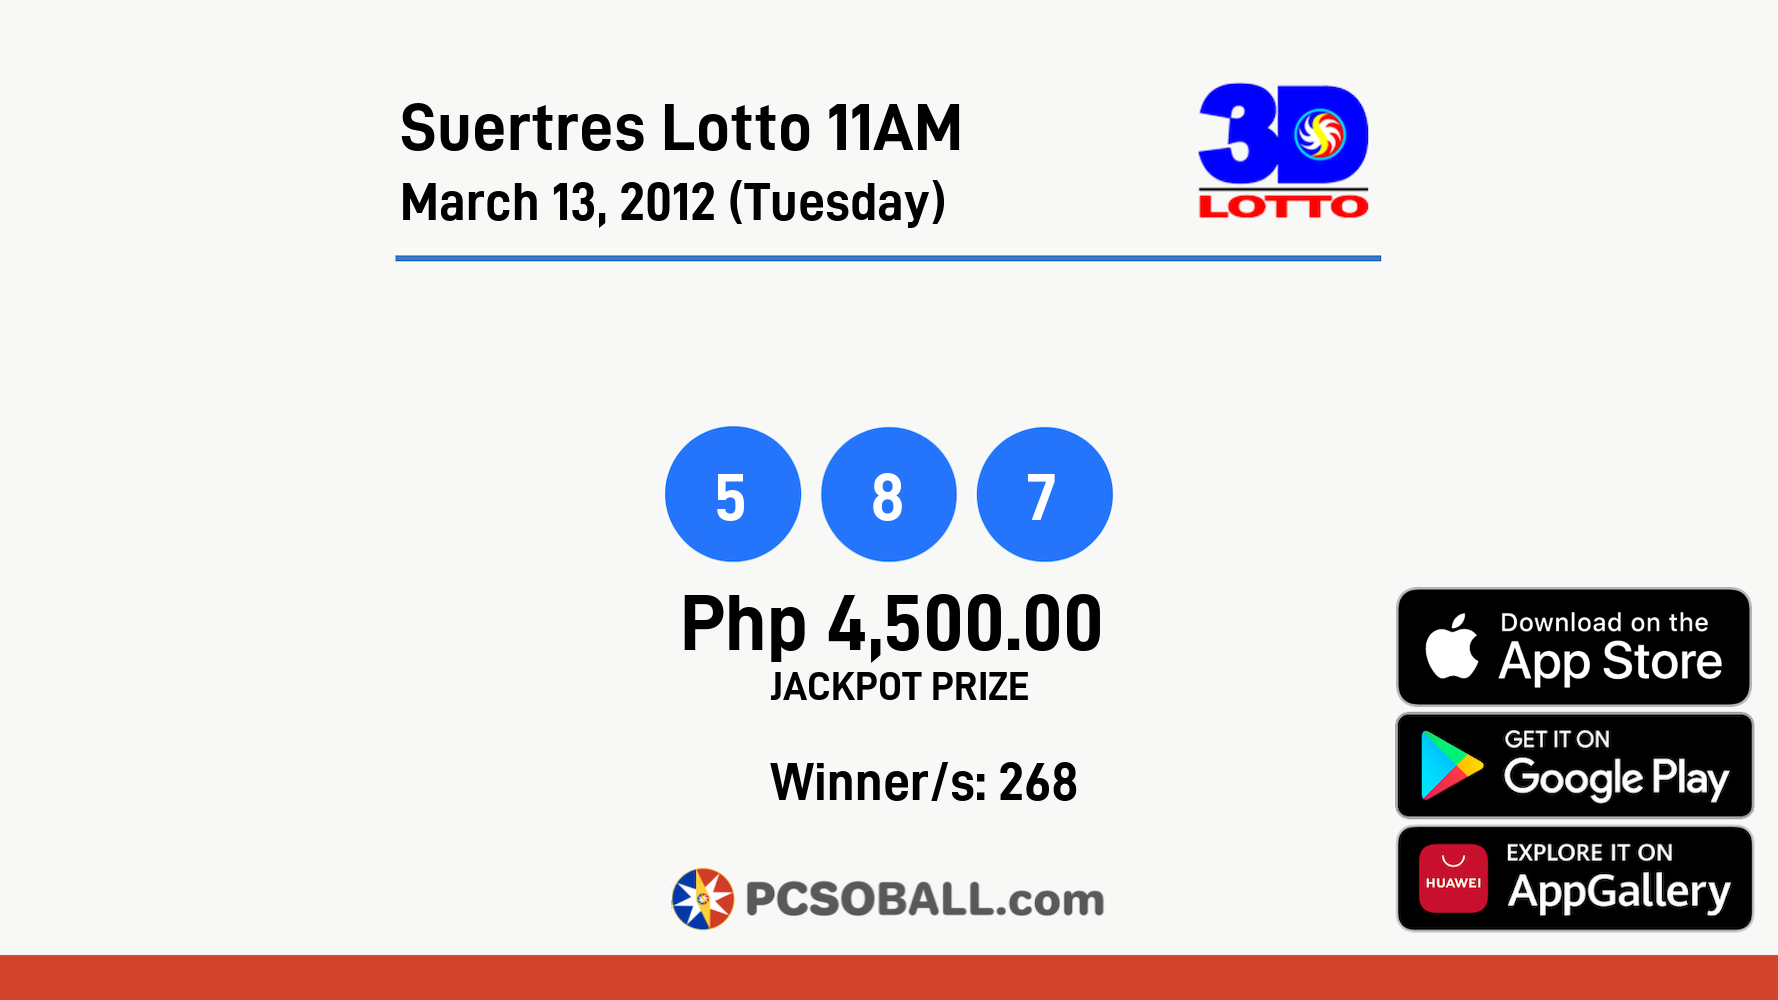 Suertres Lotto 11AM March 13, 2012 (Tuesday) Result